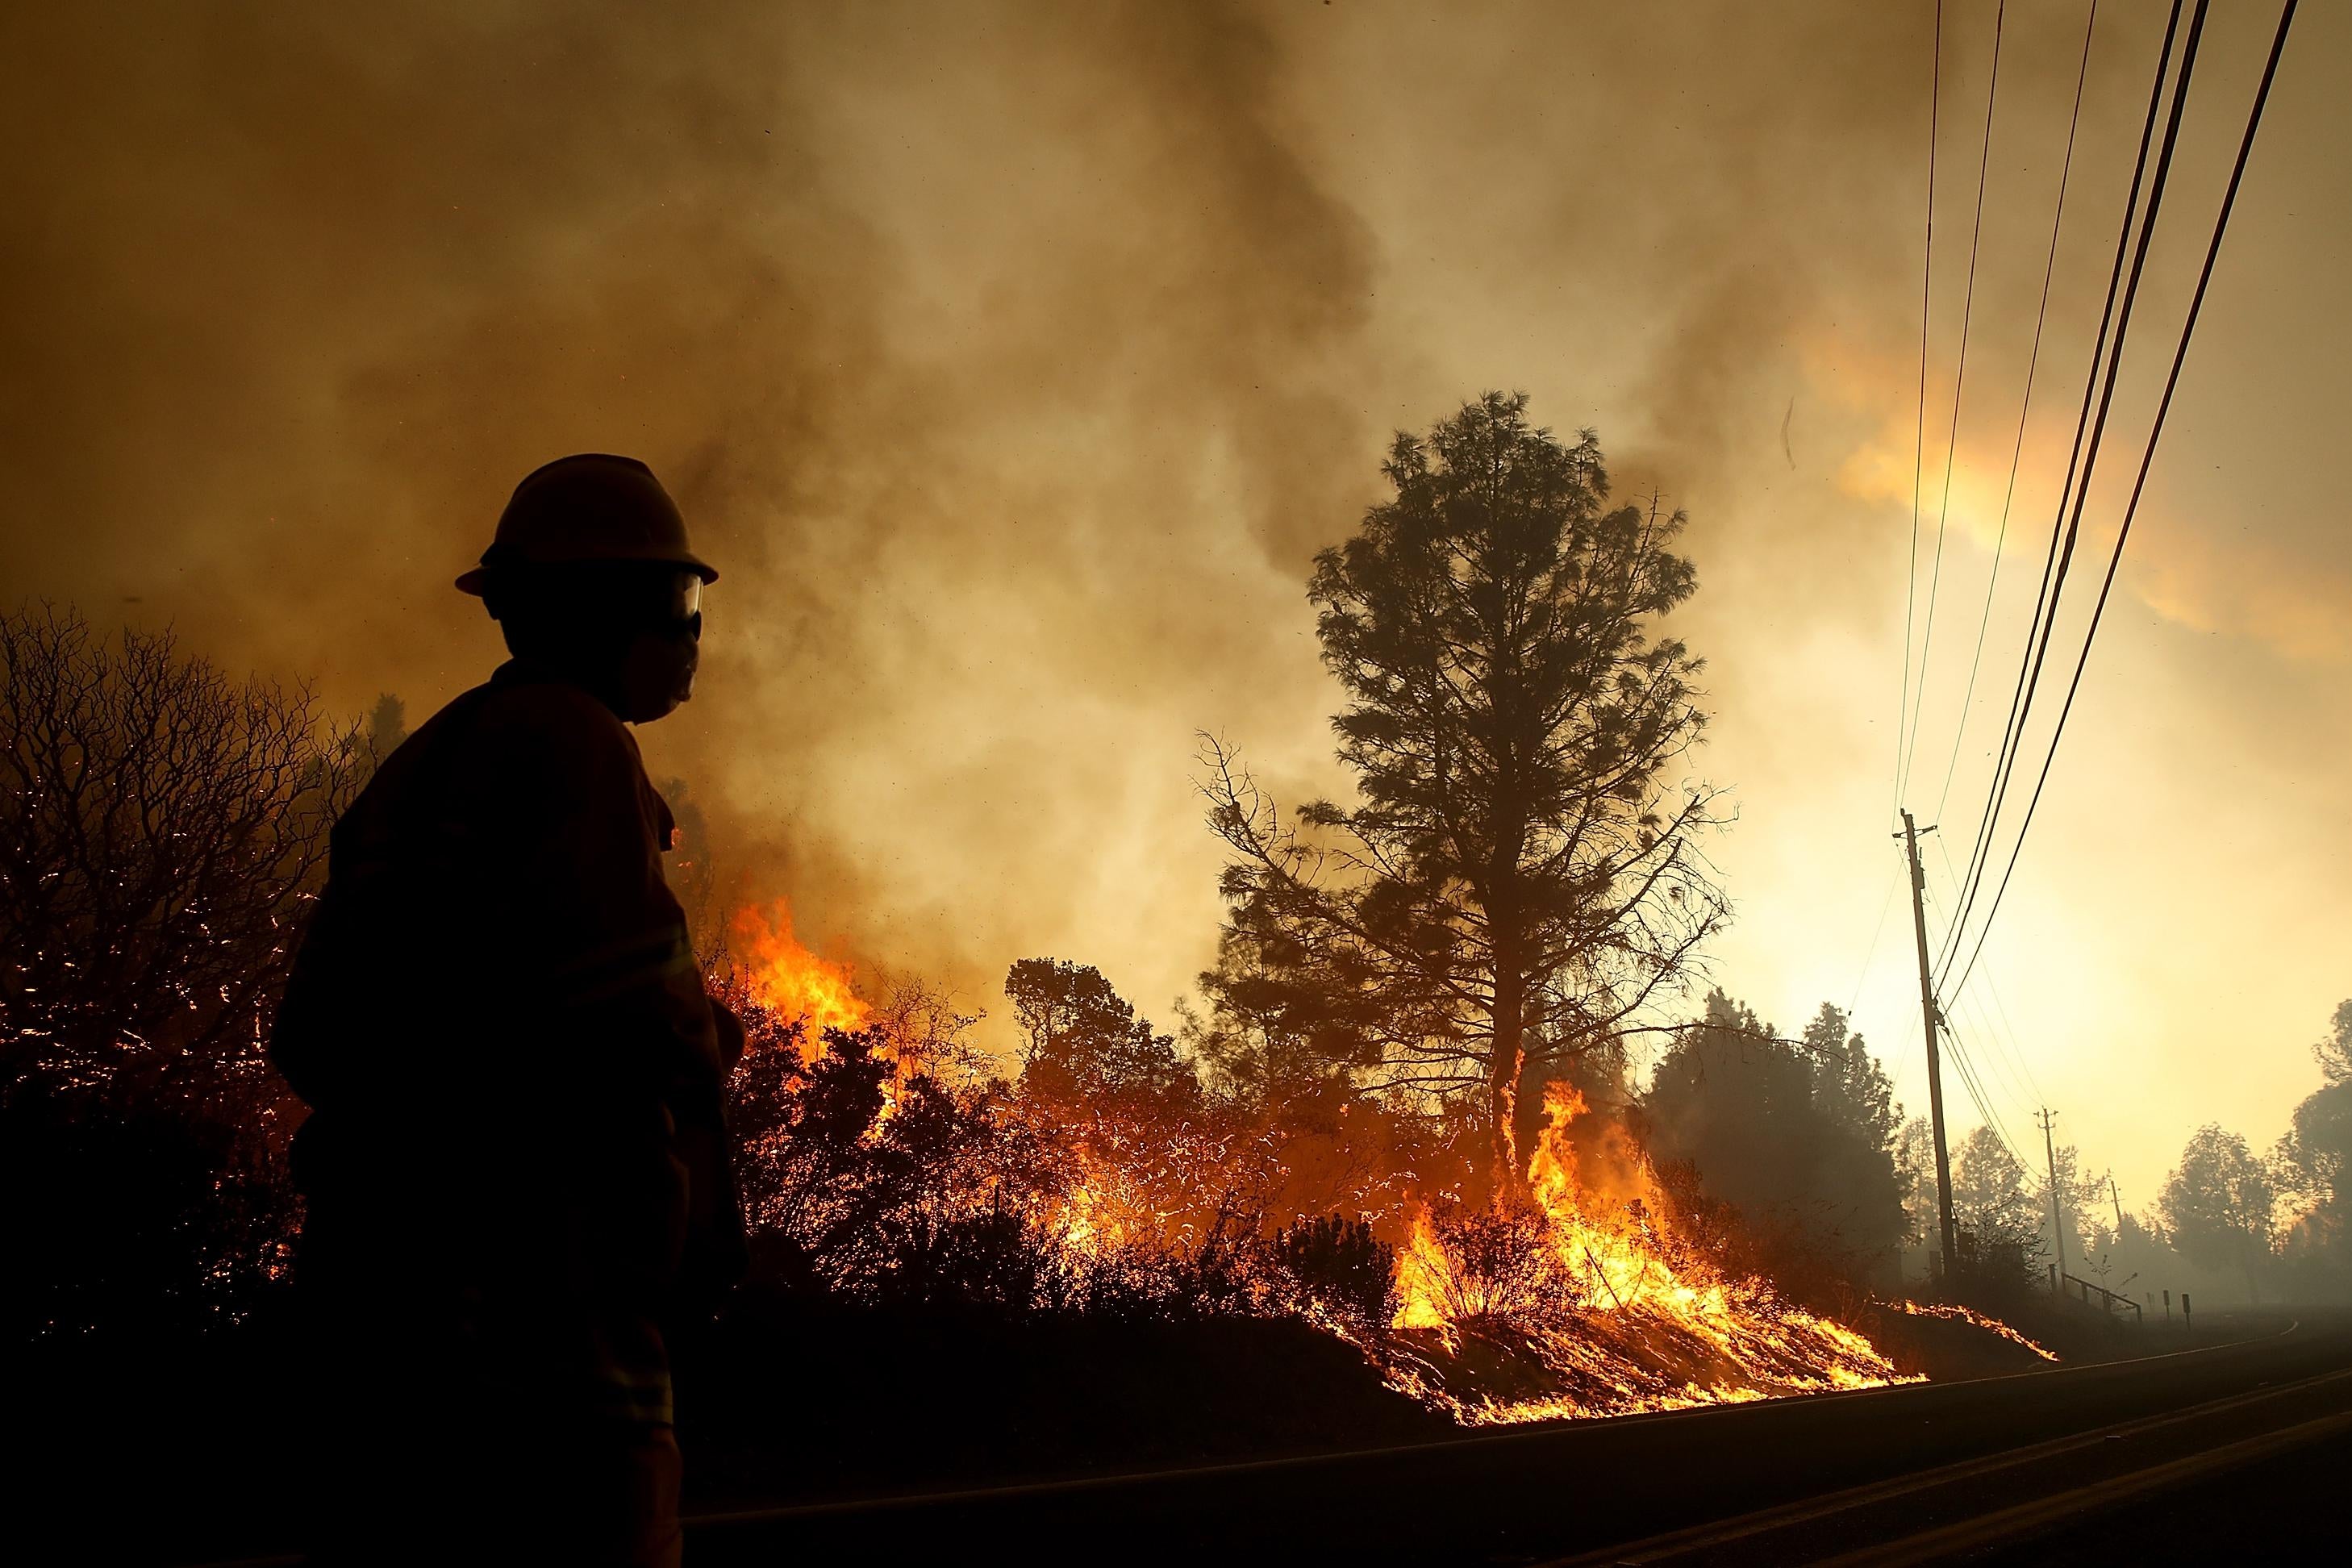 A firefighter stands on a highway as the fire burns by the roadside.